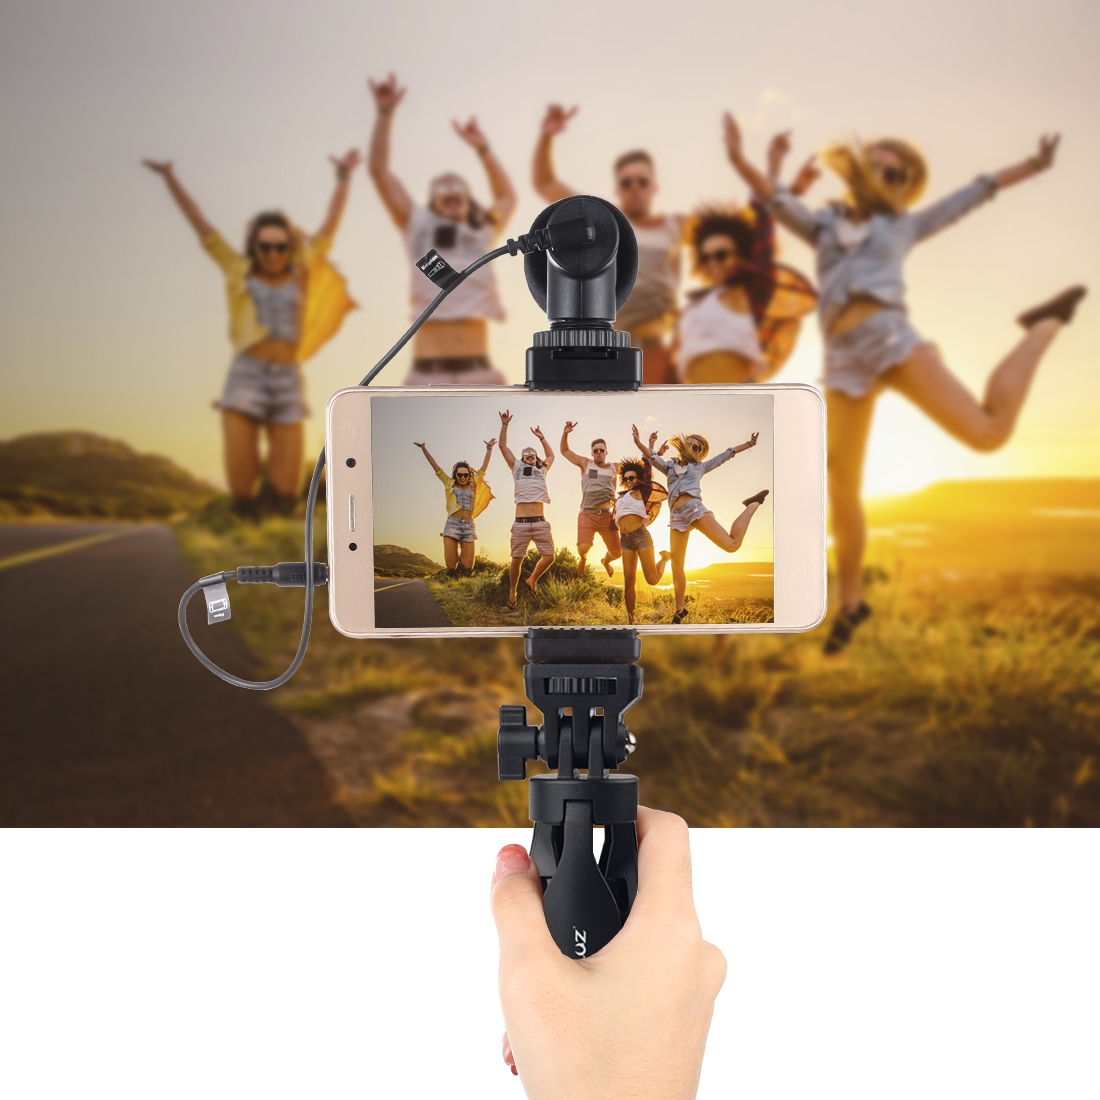 PULUZ Desk Plastic Tripod Mount with Phone Clamp Adjusting Tripod for Camera / Action Camera / Cell Phone , Huawei Sumsung Oppo Vivo Xiaomi Iphone 12 Smartphones